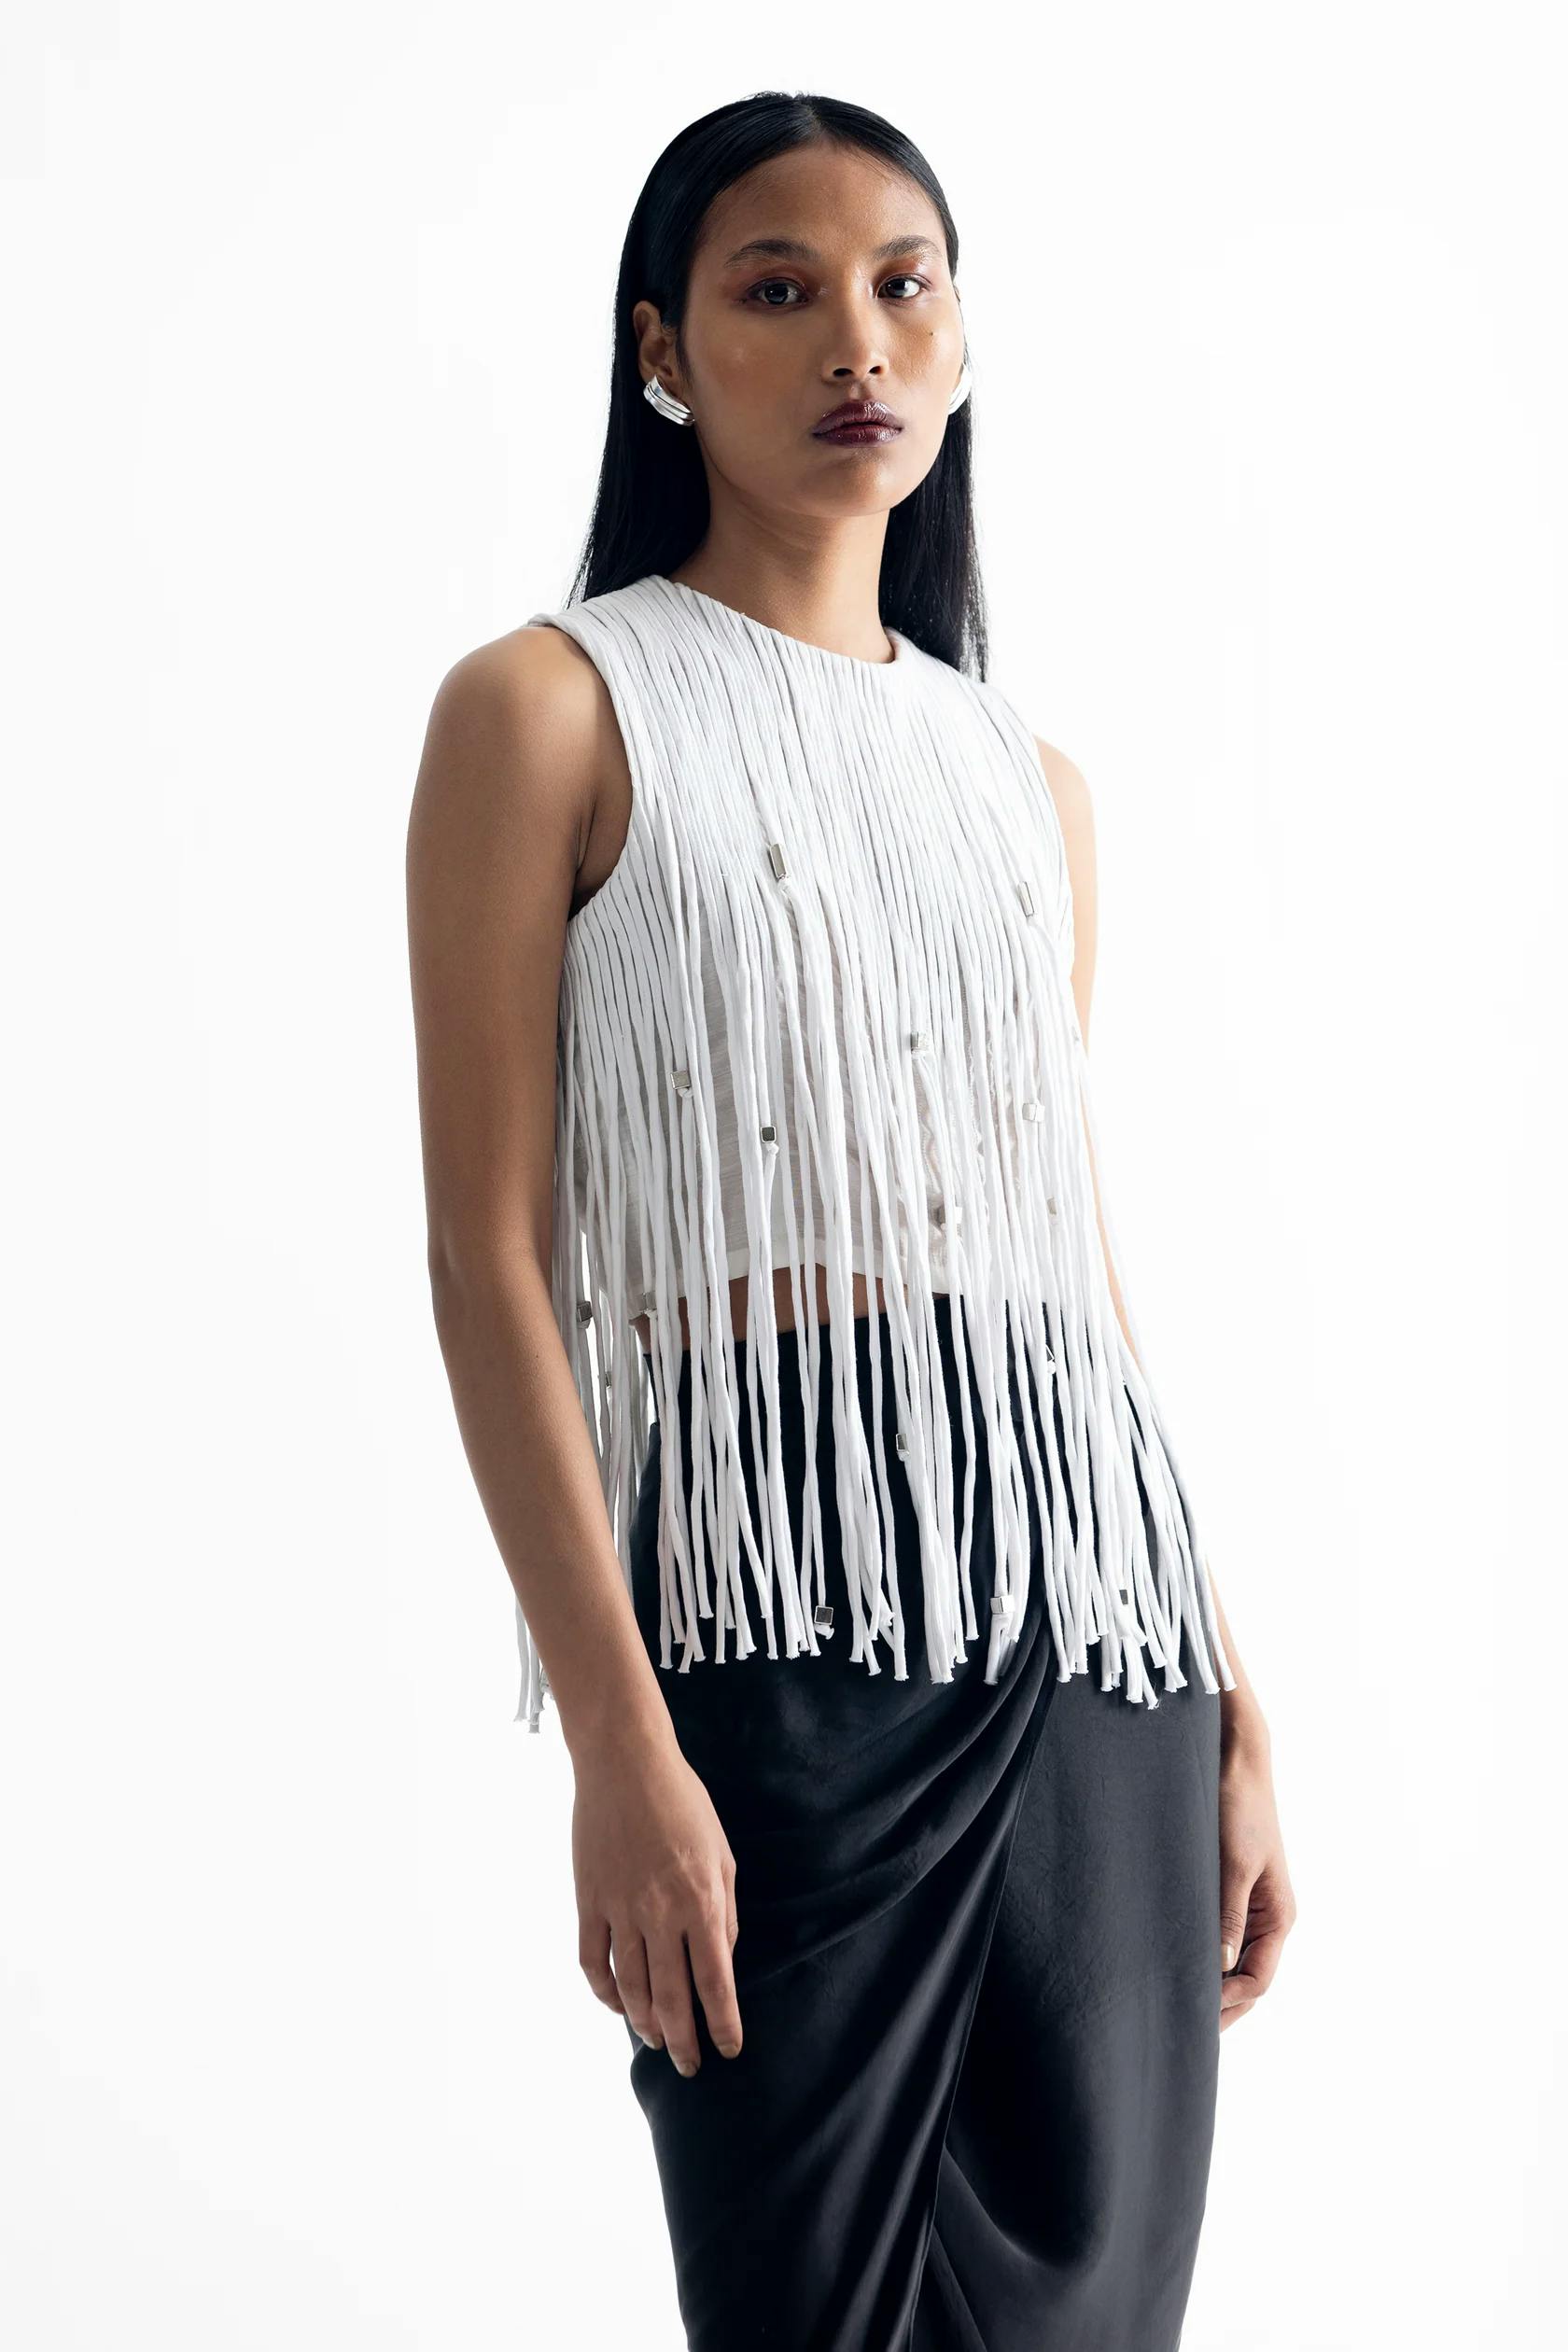 Unusual Twirl top, a product by Corpora Studio